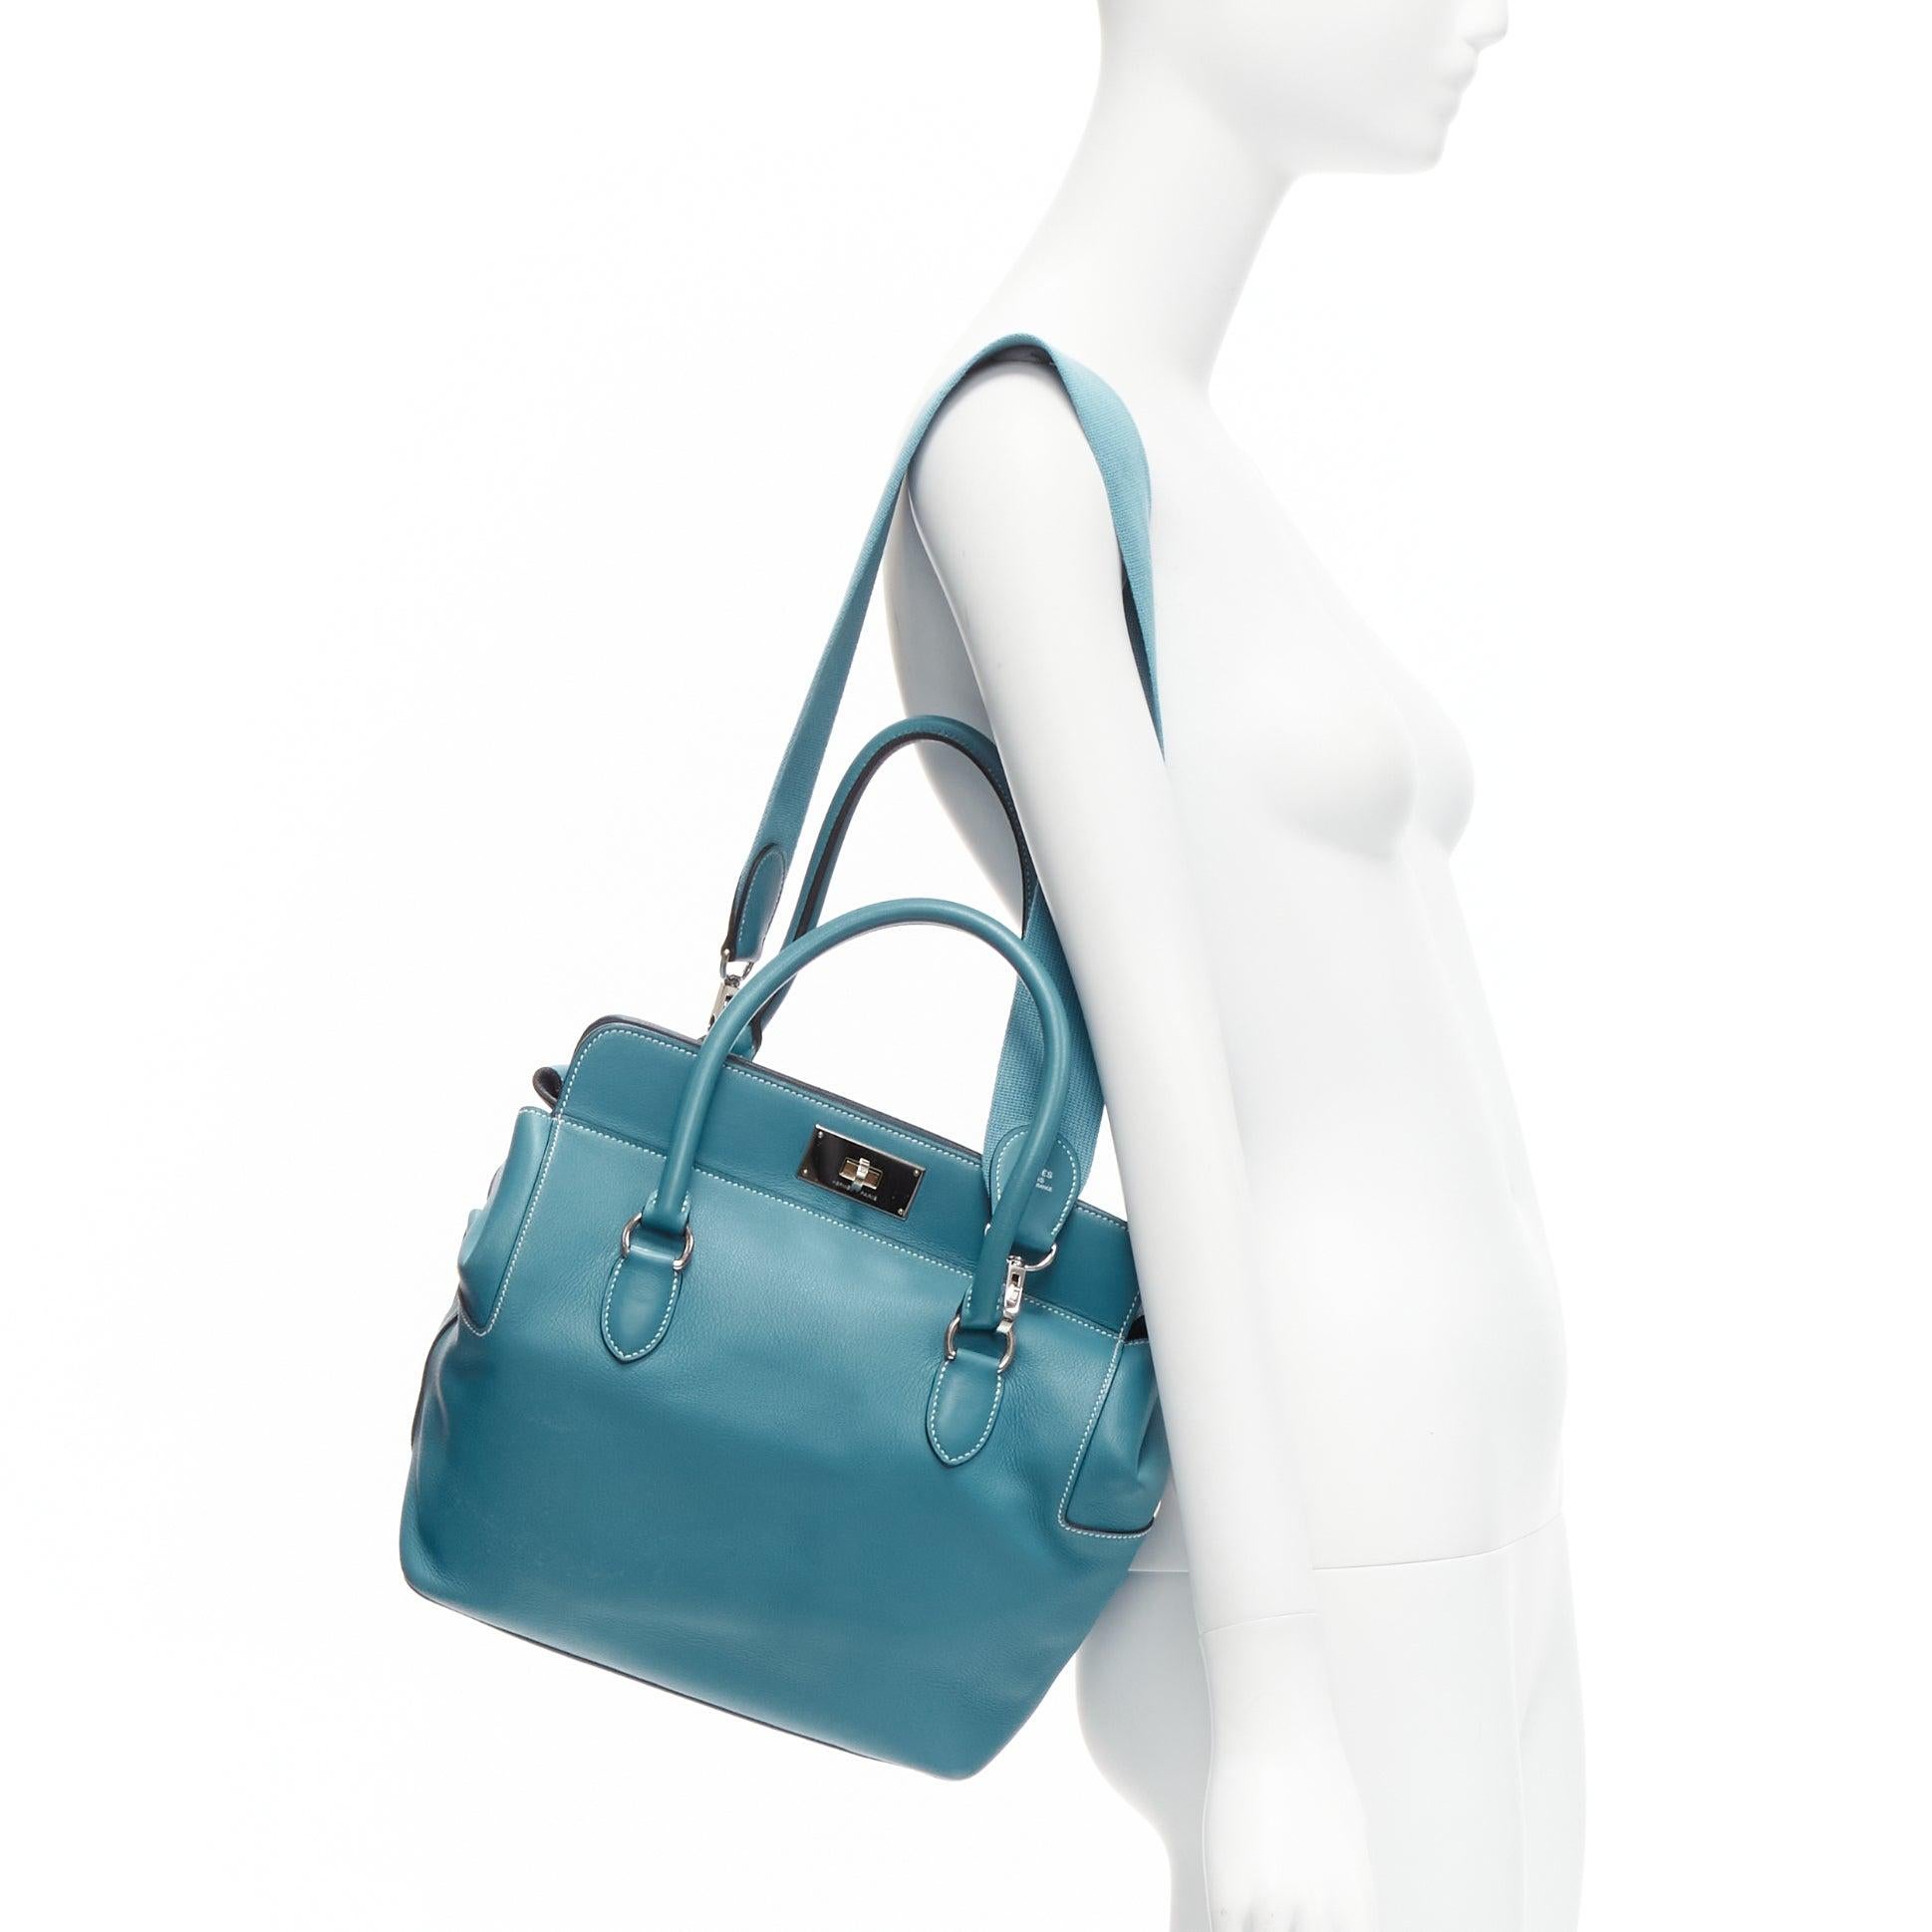 HERMES Toolbox 26 teal blue grained leather SHW top handle satchel
Reference: CELE/A00018
Brand: Hermes
Model: Toolbox 26
Material: Leather
Color: Blue
Pattern: Solid
Closure: Turnlock
Lining: Blue Leather
Extra Details: Herm√®s Shoulder Bag.